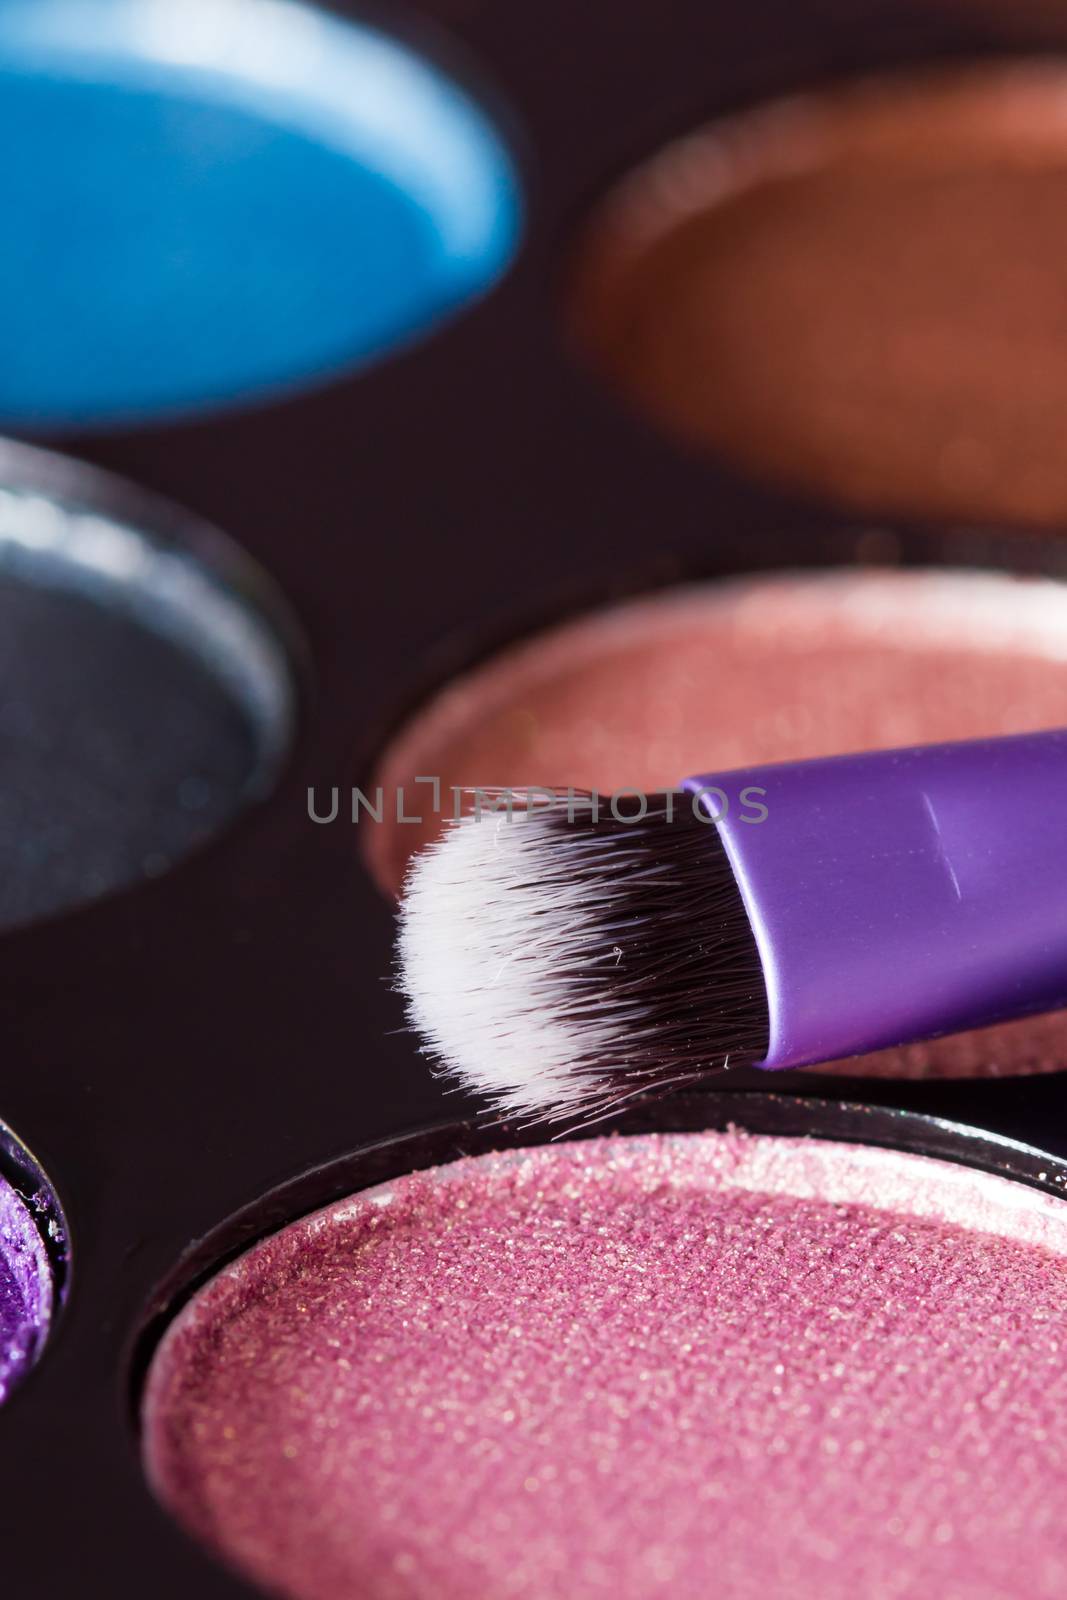 Snytethic makeup brush with colorful makeup palette in the background